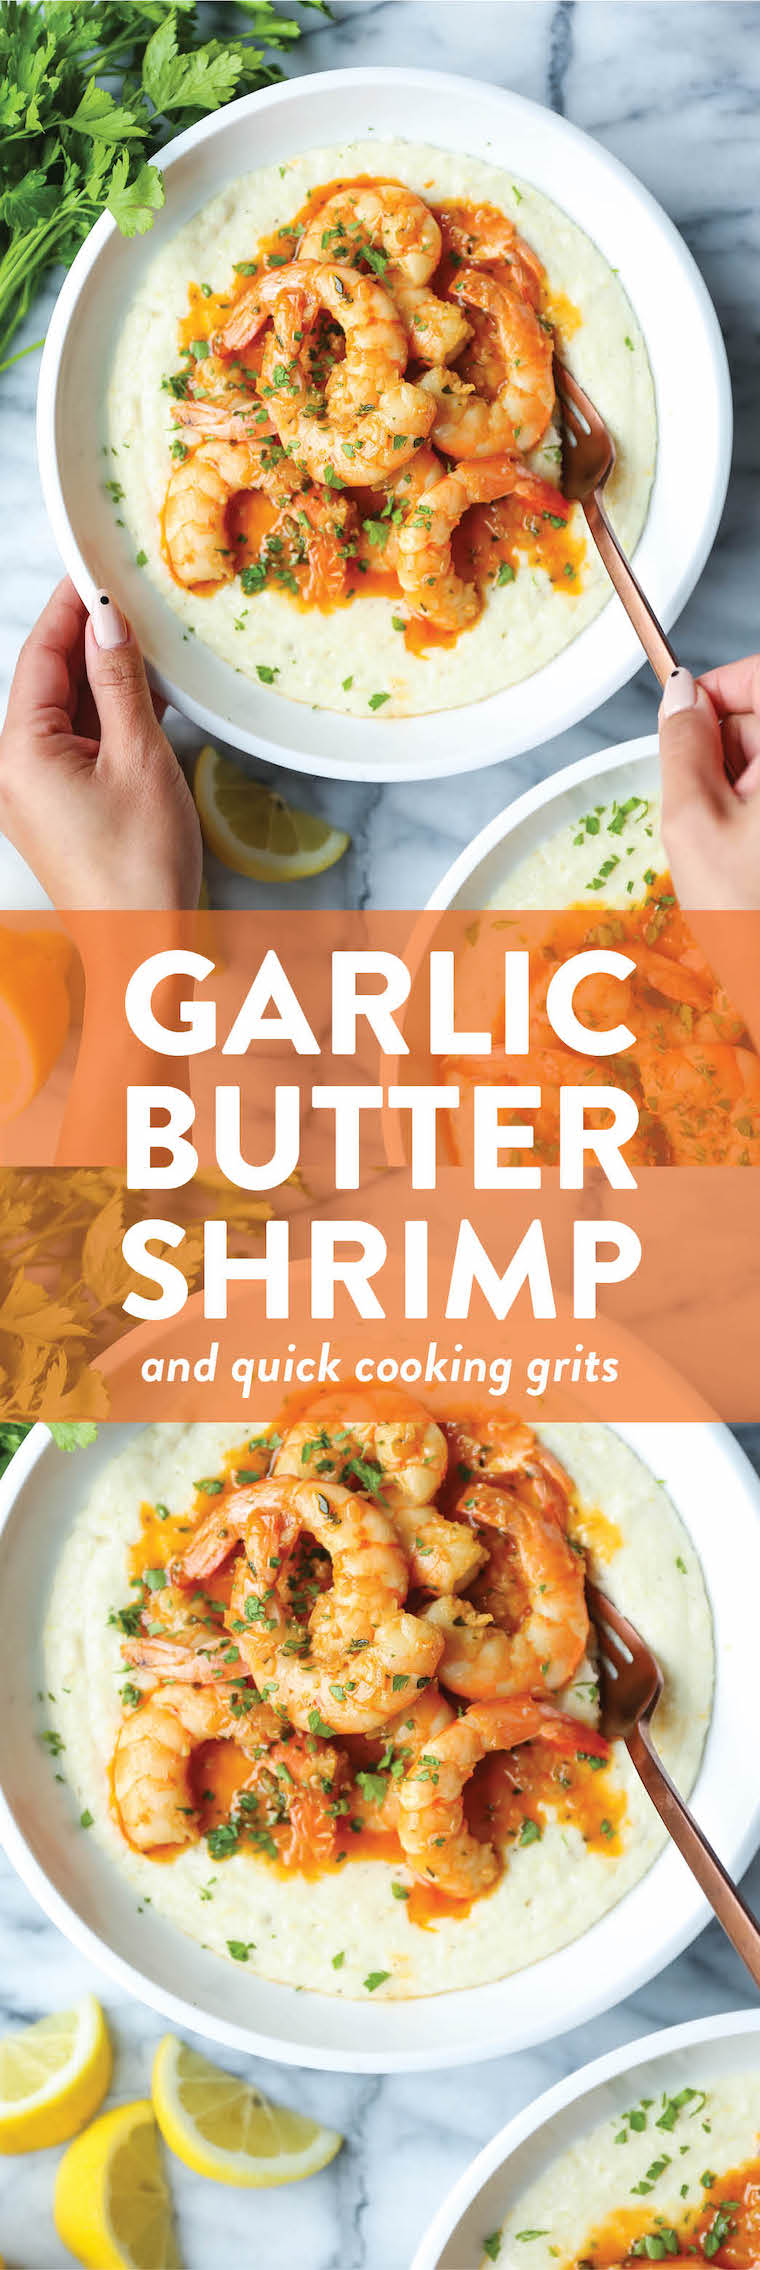 Garlic Butter Shrimp and Grits - Speedy comfort food at its best! Perfectly garlicky, buttery shrimp cooked so so quickly, served with the creamiest grits!